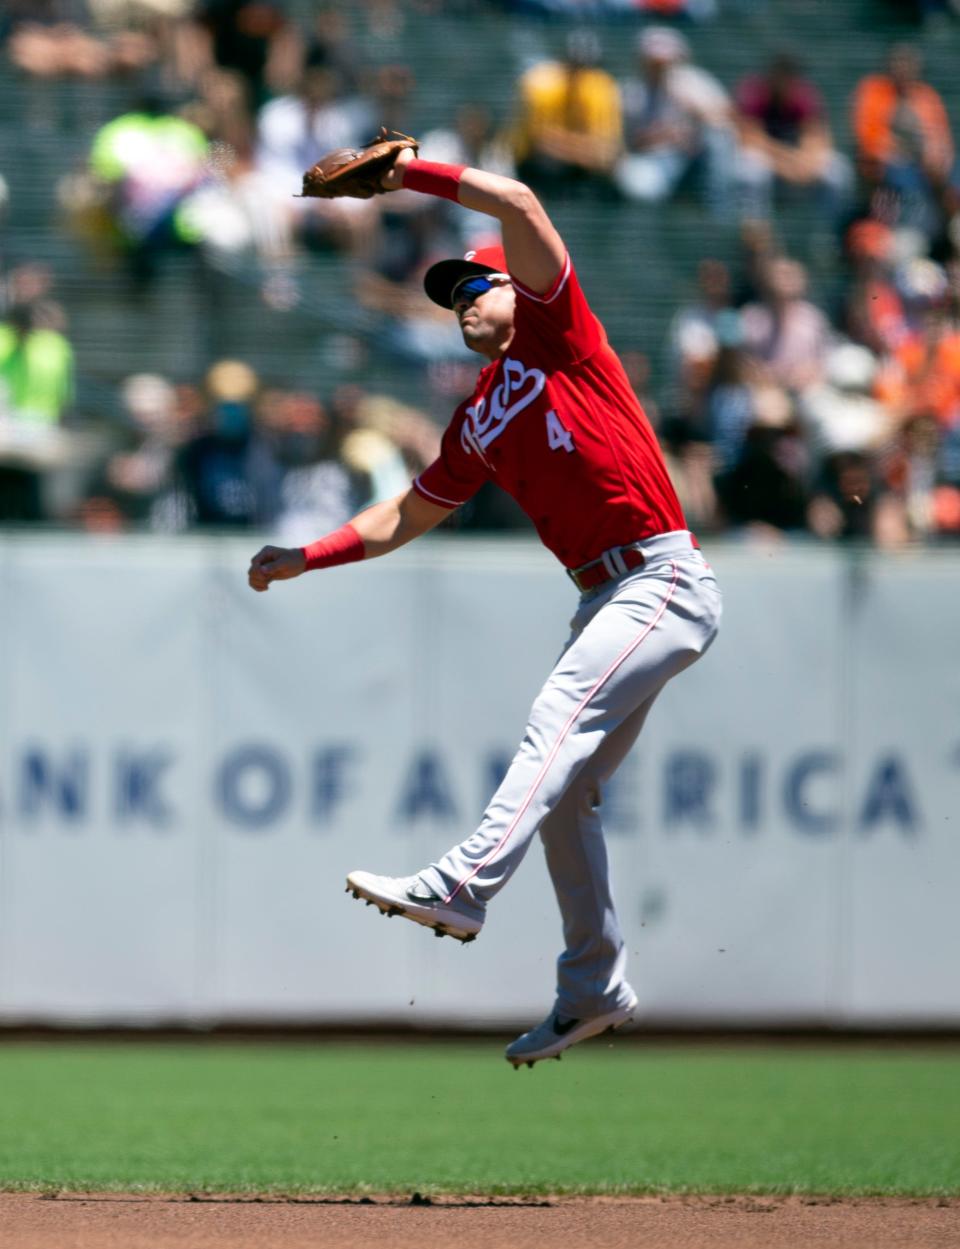 Jun 26, 2022; San Francisco, California, USA; Cincinnati Reds shortstop Matt Reynolds (4) makes a leaping catch of a line drive by San Francisco Giants center fielder Austin Slater during the first inning at Oracle Park. Mandatory Credit: D. Ross Cameron-USA TODAY Sports